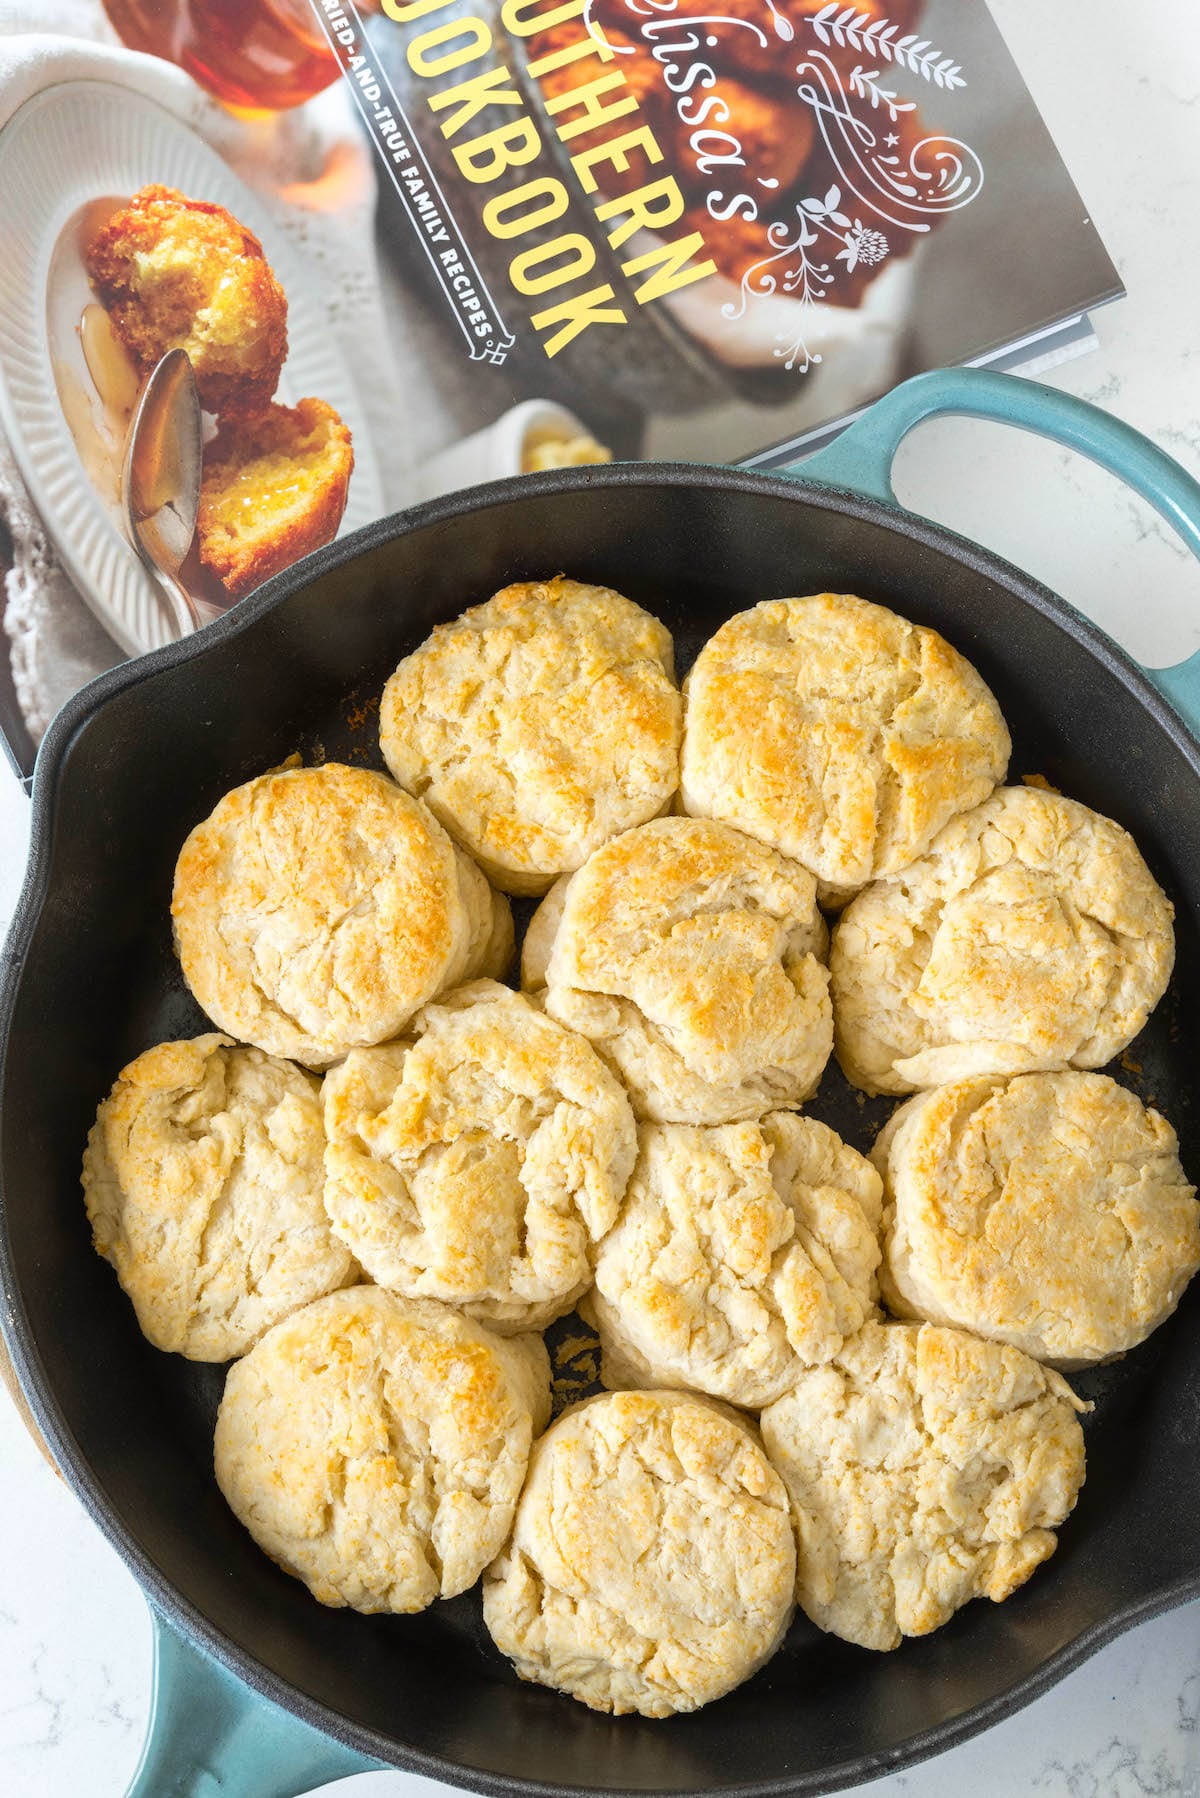 cooked biscuits in a black pan next to a cookbook.